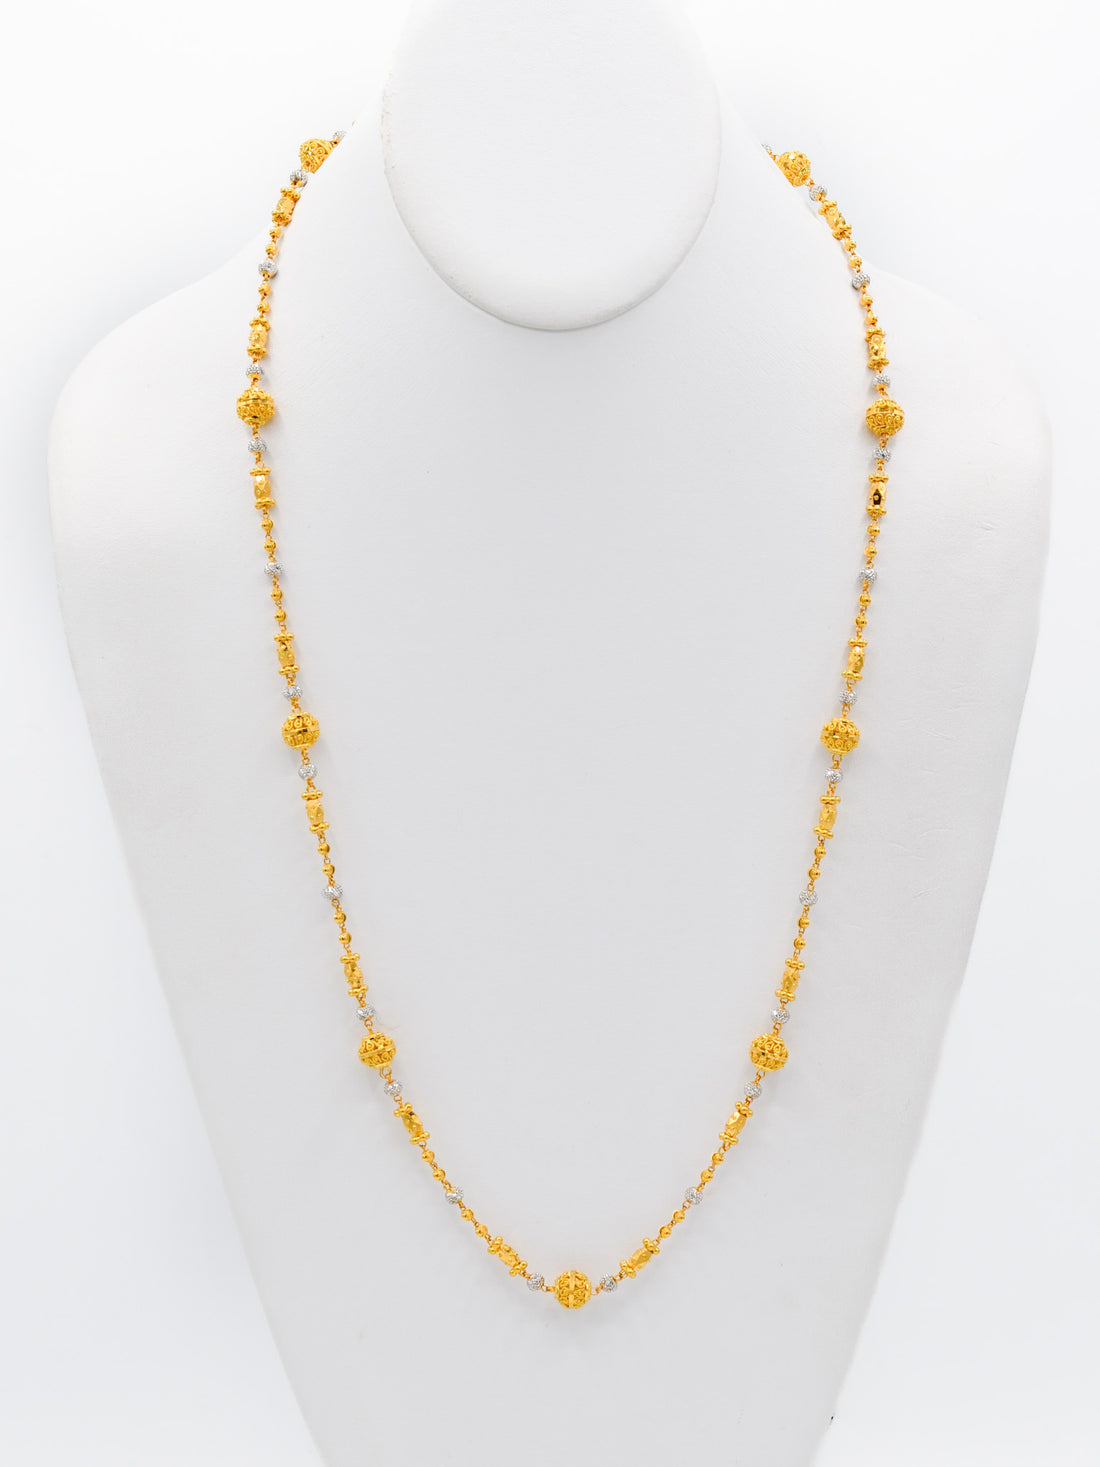 22ct Gold Two Tone Ball Long Fancy Chain - Roop Darshan